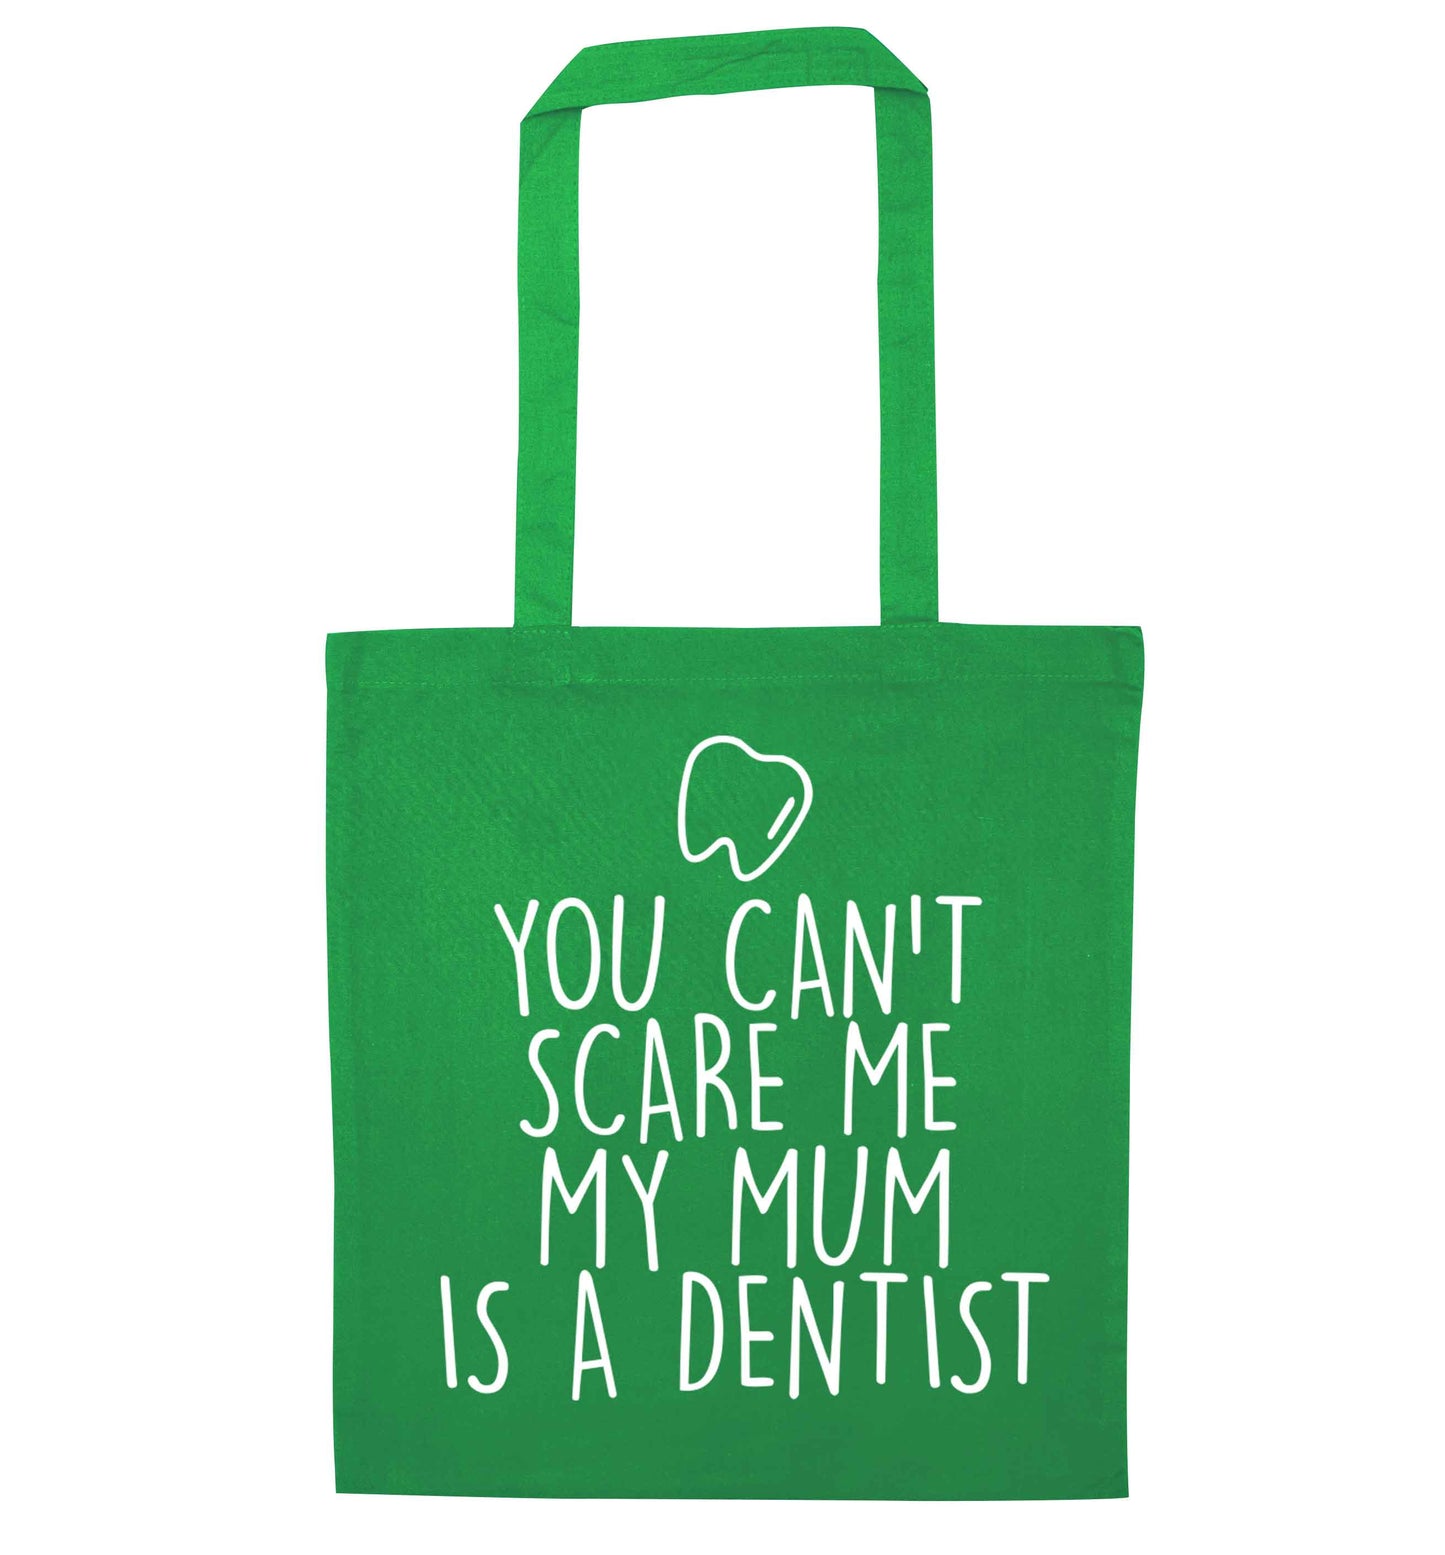 Minty Kisses Tooth Fairy (a) green tote bag